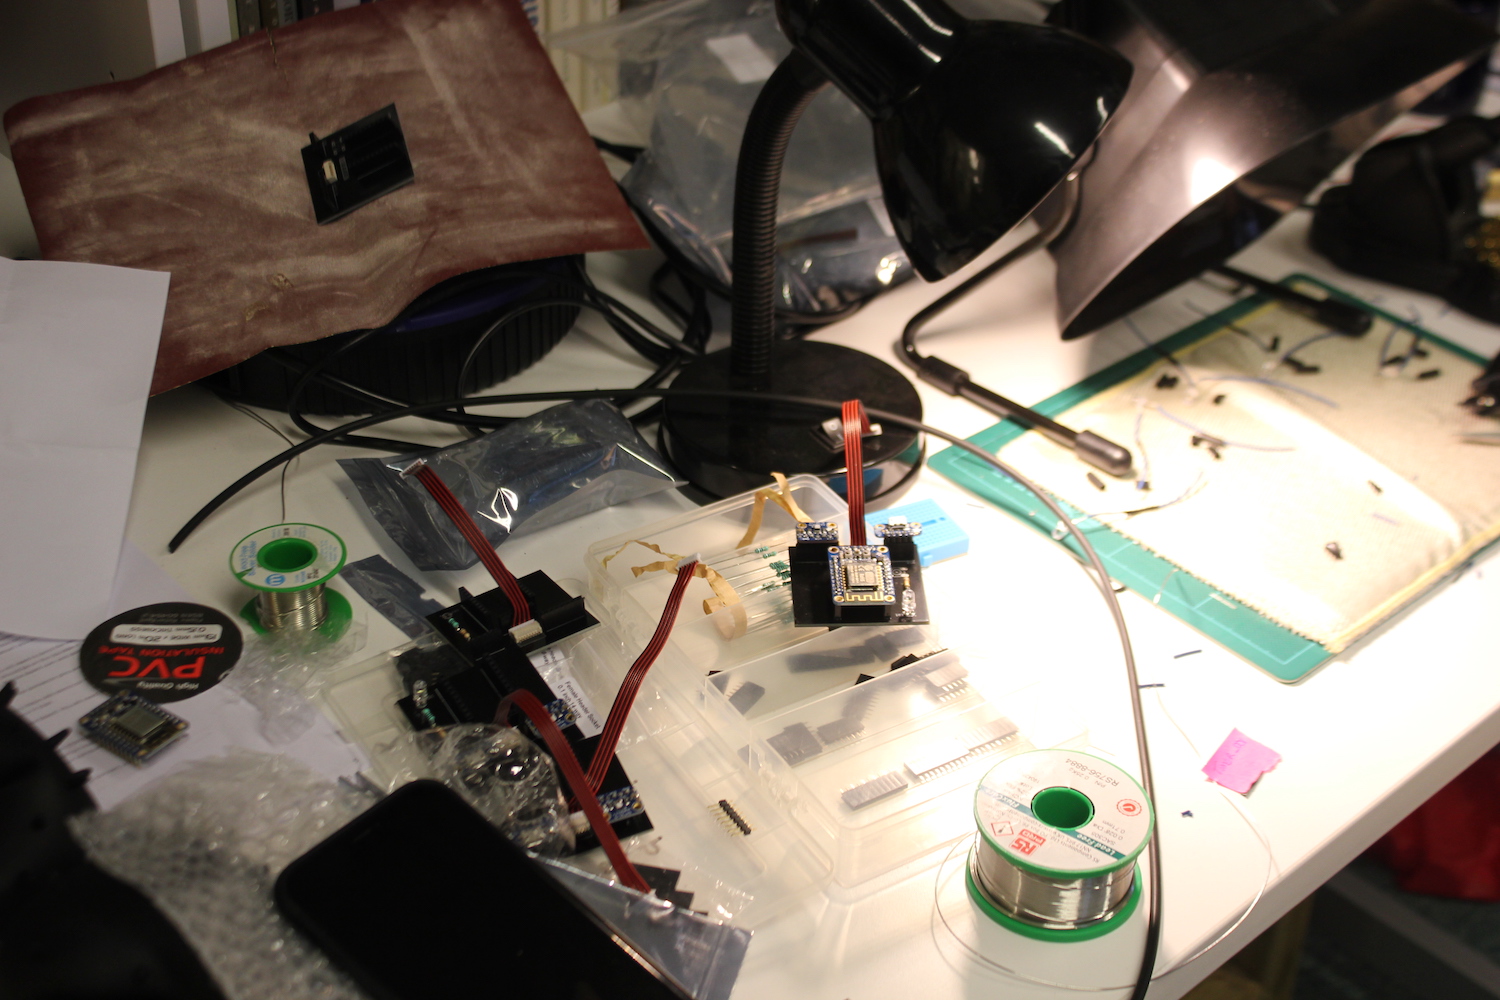 A view of the desk used for soldering in the Citizen Sense lab showing part assembled Dustboxes, extractor fan, solder, light and heatproof mat